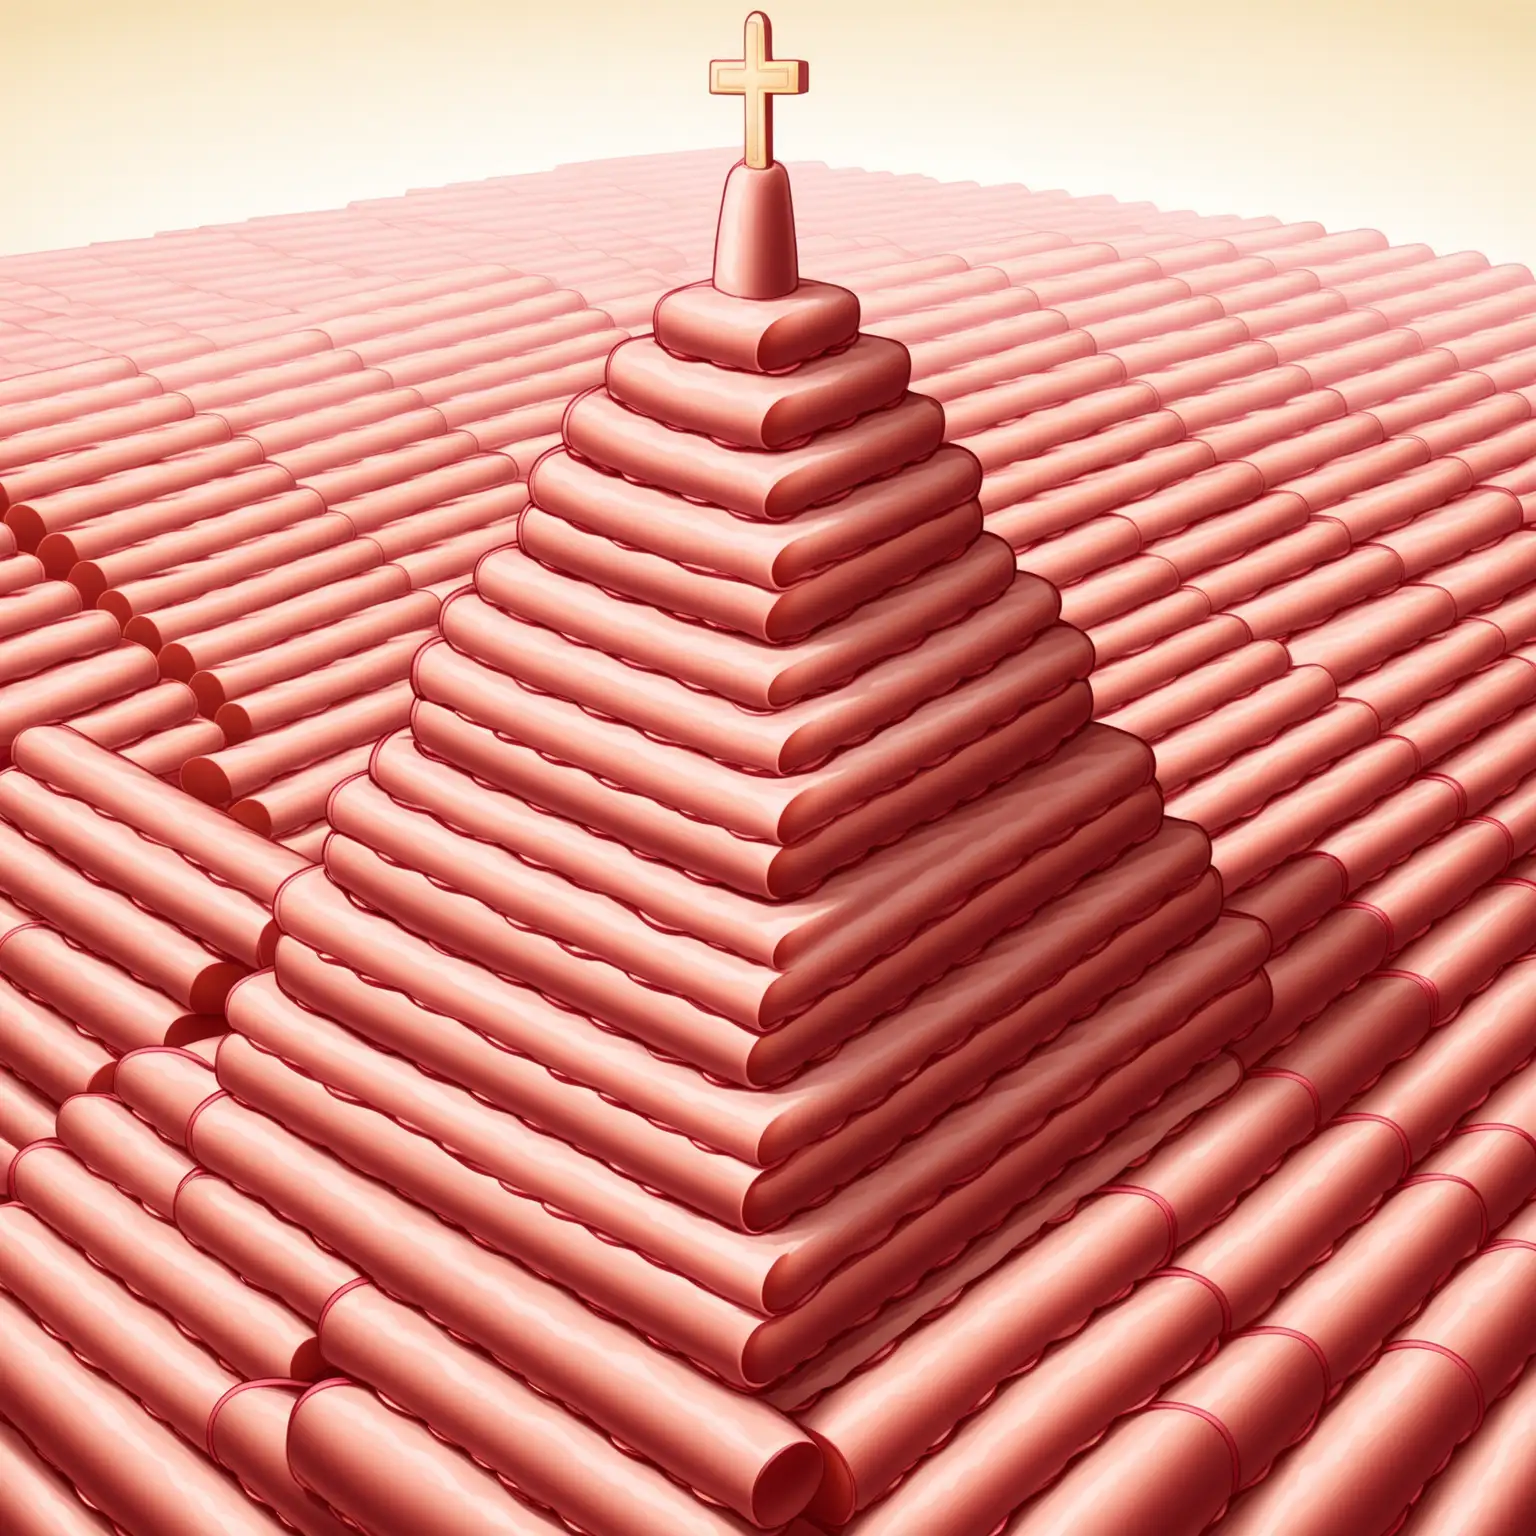 Whimsical Cartoon Church Constructed from Stacked and Folded Bologna